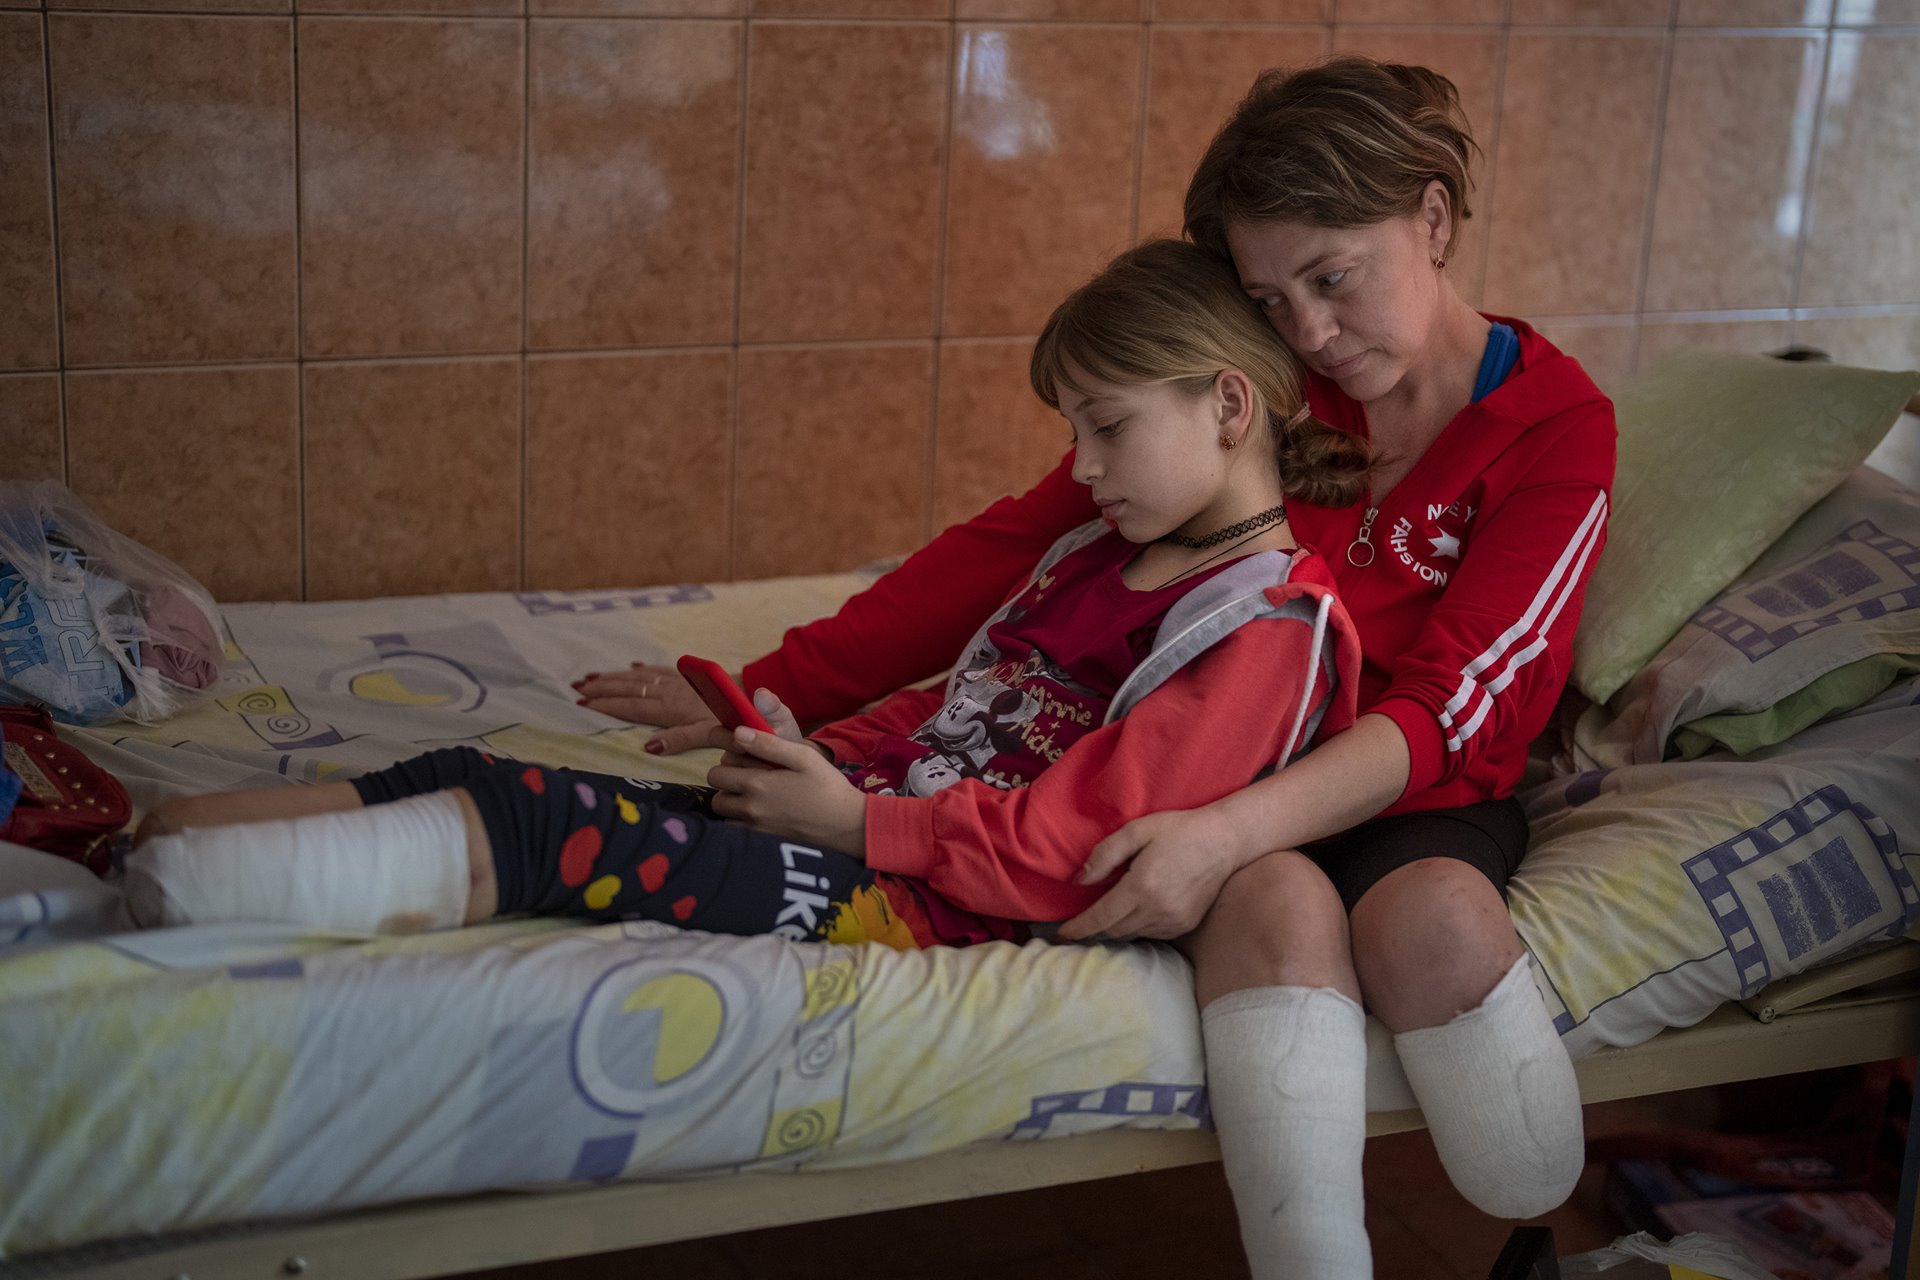 Natasha Stepanenko (43) sits on her bed with her daughter Yana (11) &nbsp;at a public hospital in Lviv, Ukraine. Natasha, together with Yana and her twin brother Yarik, were injured during shelling of a train station in the eastern city of Kramatorsk, on 8 April. According to the UN Human Rights Office, some 60 civilians were killed, and 110 wounded in a Russian missile strike on the station. Thousands of civilians were gathered there, awaiting evacuation. Russia denied involvement, claiming the strike was orchestrated by Ukraine. The family were later flown to San Diego, in the United States, where Yana and Natasha received new prostheses, and Yana underwent surgery.